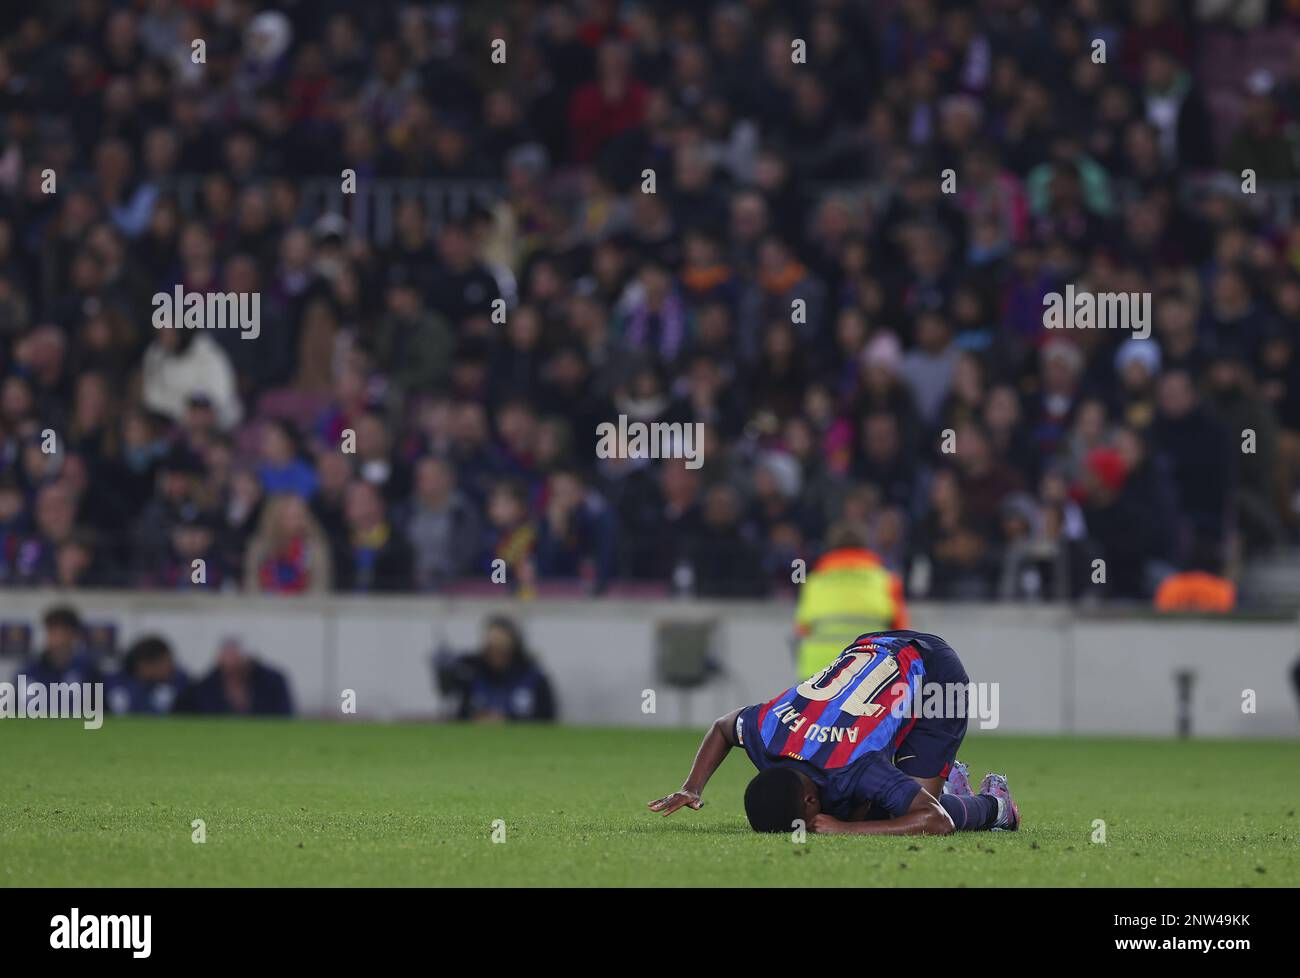 Barcelona, Spain. 19th Feb, 2023. Ansu Fati of Barcelona during the La Liga football match between Barcelona and Cadiz in Estadio Camp Nou in Barcelona, Spain. Barcelona won the game 2-0 (goals by Sergi Roberto 43; Robert Lewandowski 45 1) (Foto: Sports Press Photo/Sports Press Photo/C - ONE HOUR DEADLINE - ONLY ACTIVATE FTP IF IMAGES LESS THAN ONE HOUR OLD - Alamy) Credit: SPP Sport Press Photo. /Alamy Live News Stock Photo